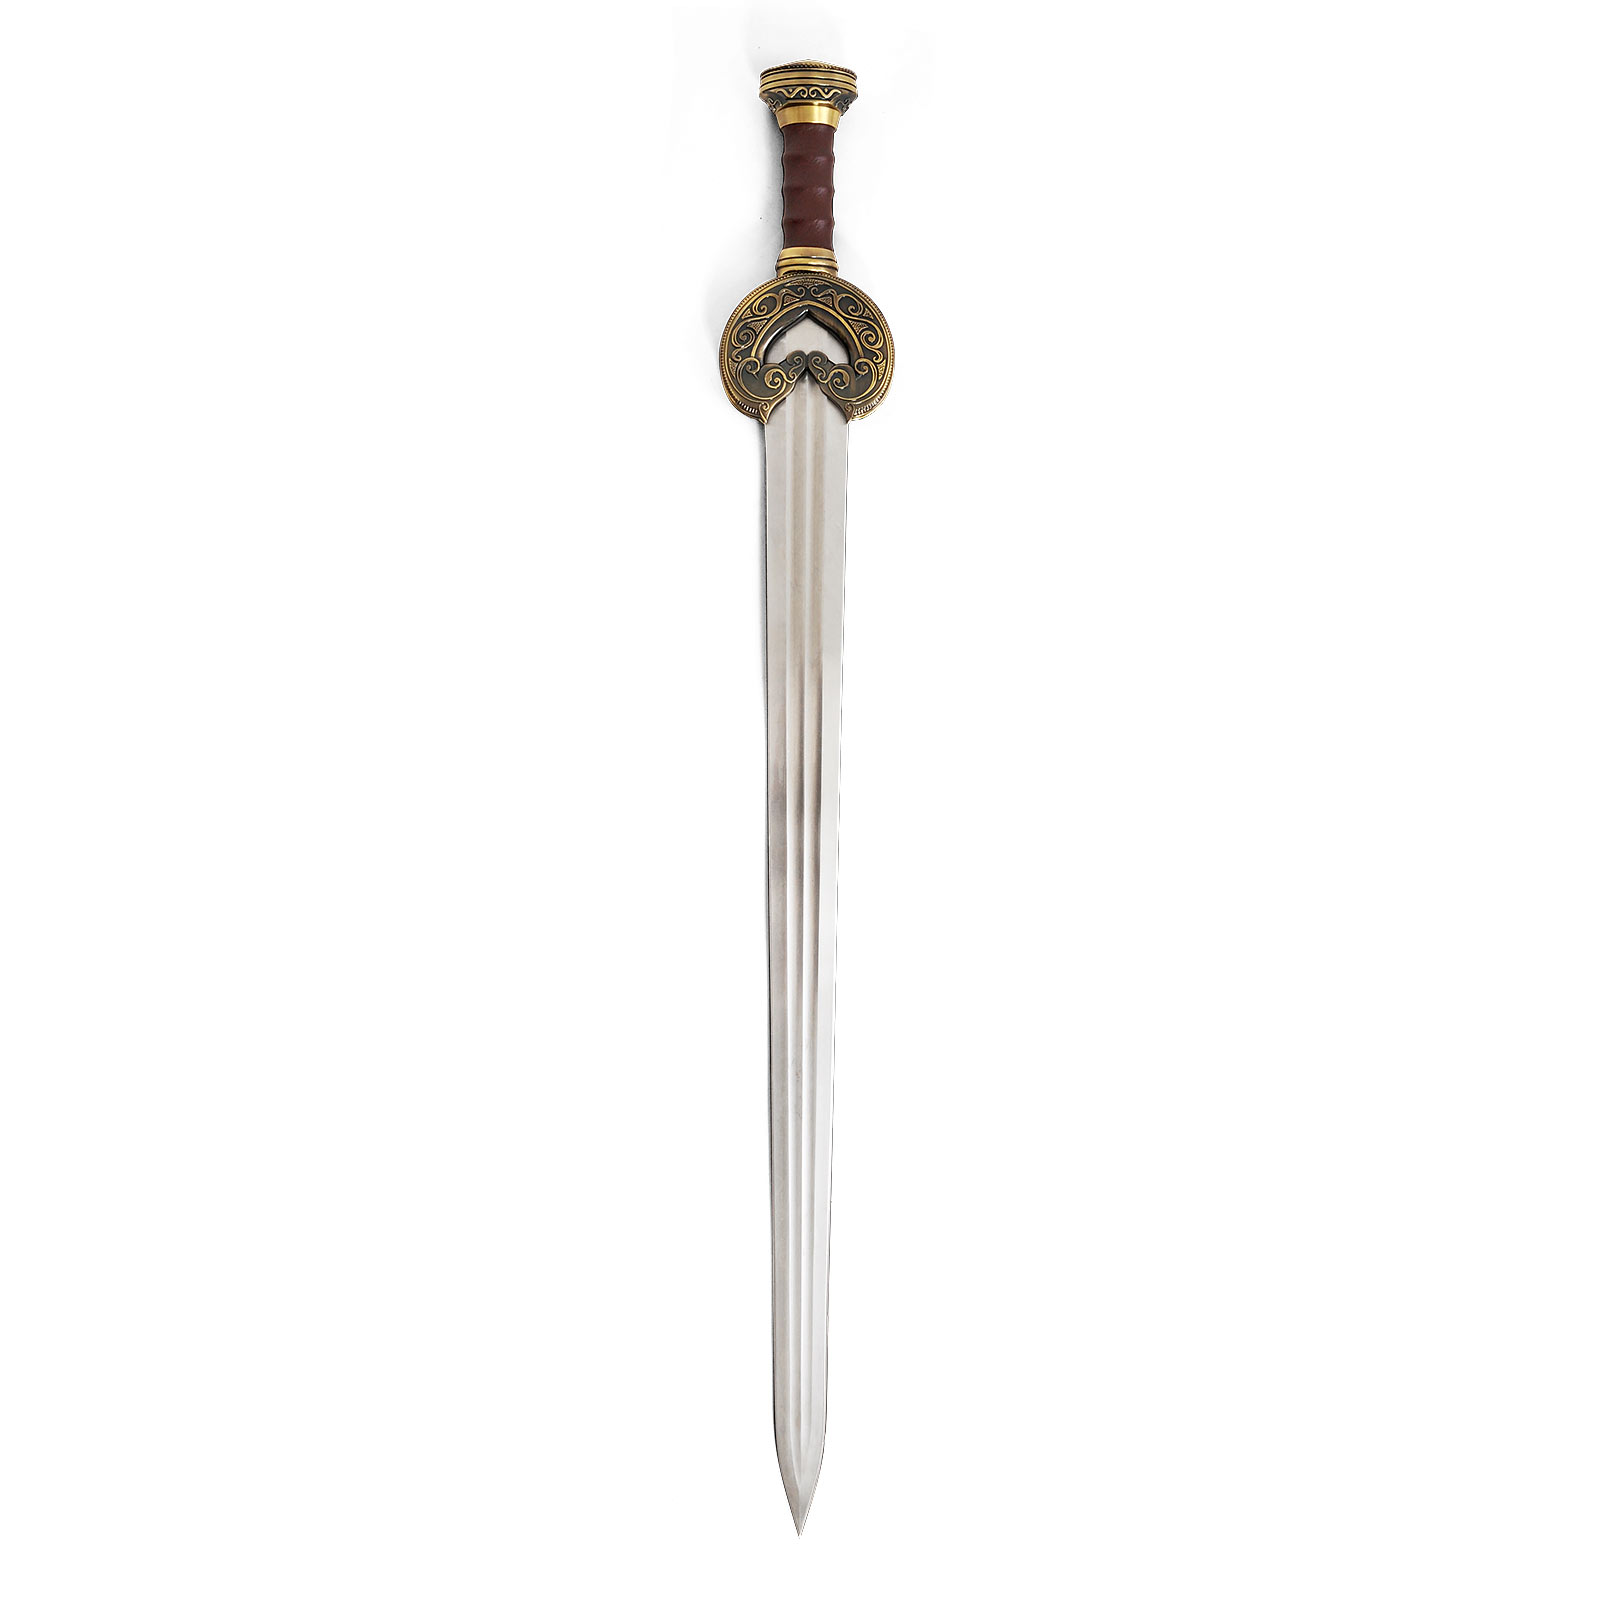 Herugrim Theoden's Sword Replica - Lord of the Rings